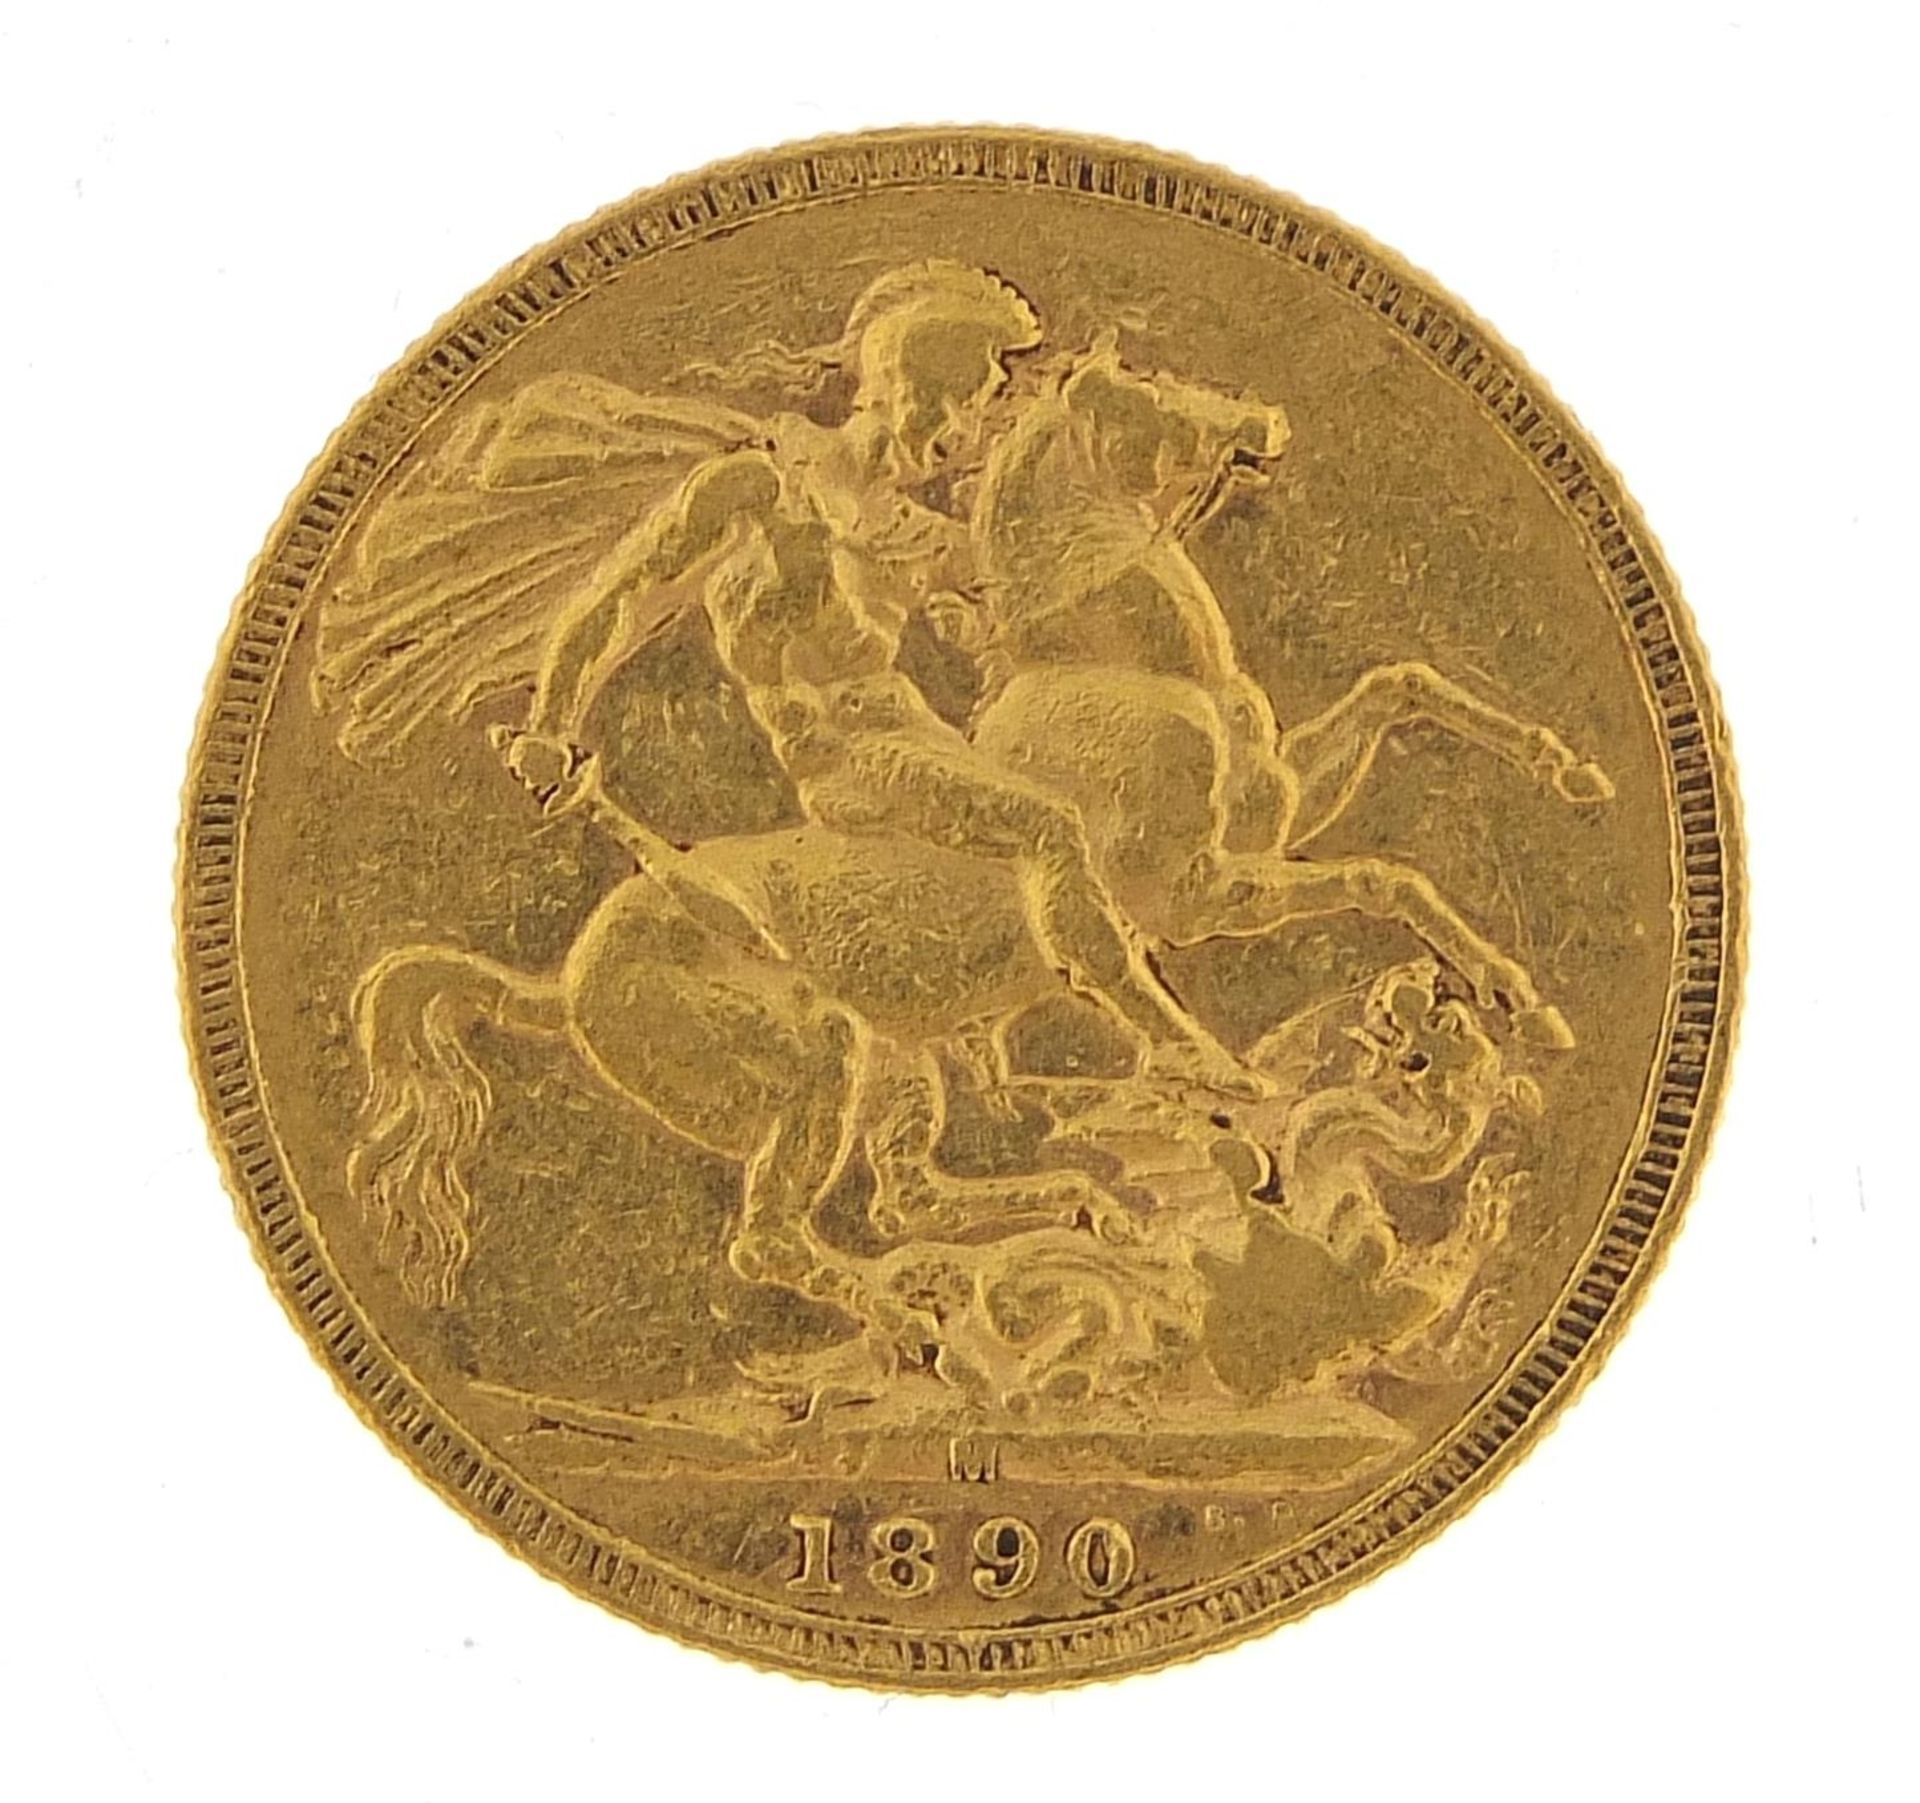 Queen Victoria Jubilee Head 1890 gold sovereign, Melbourne mint - this lot is sold without buyer?s